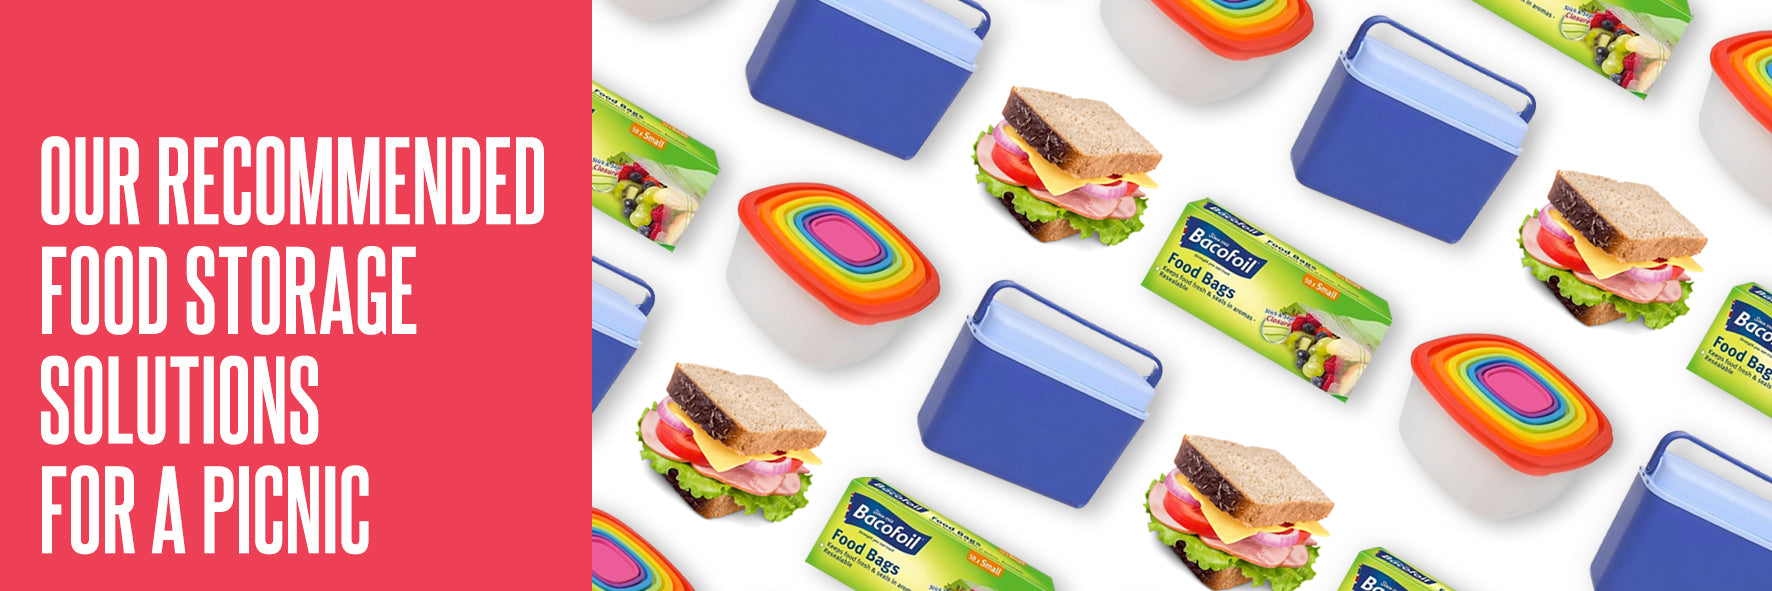 Our Recommended Food Storage Solutions for a Picnic